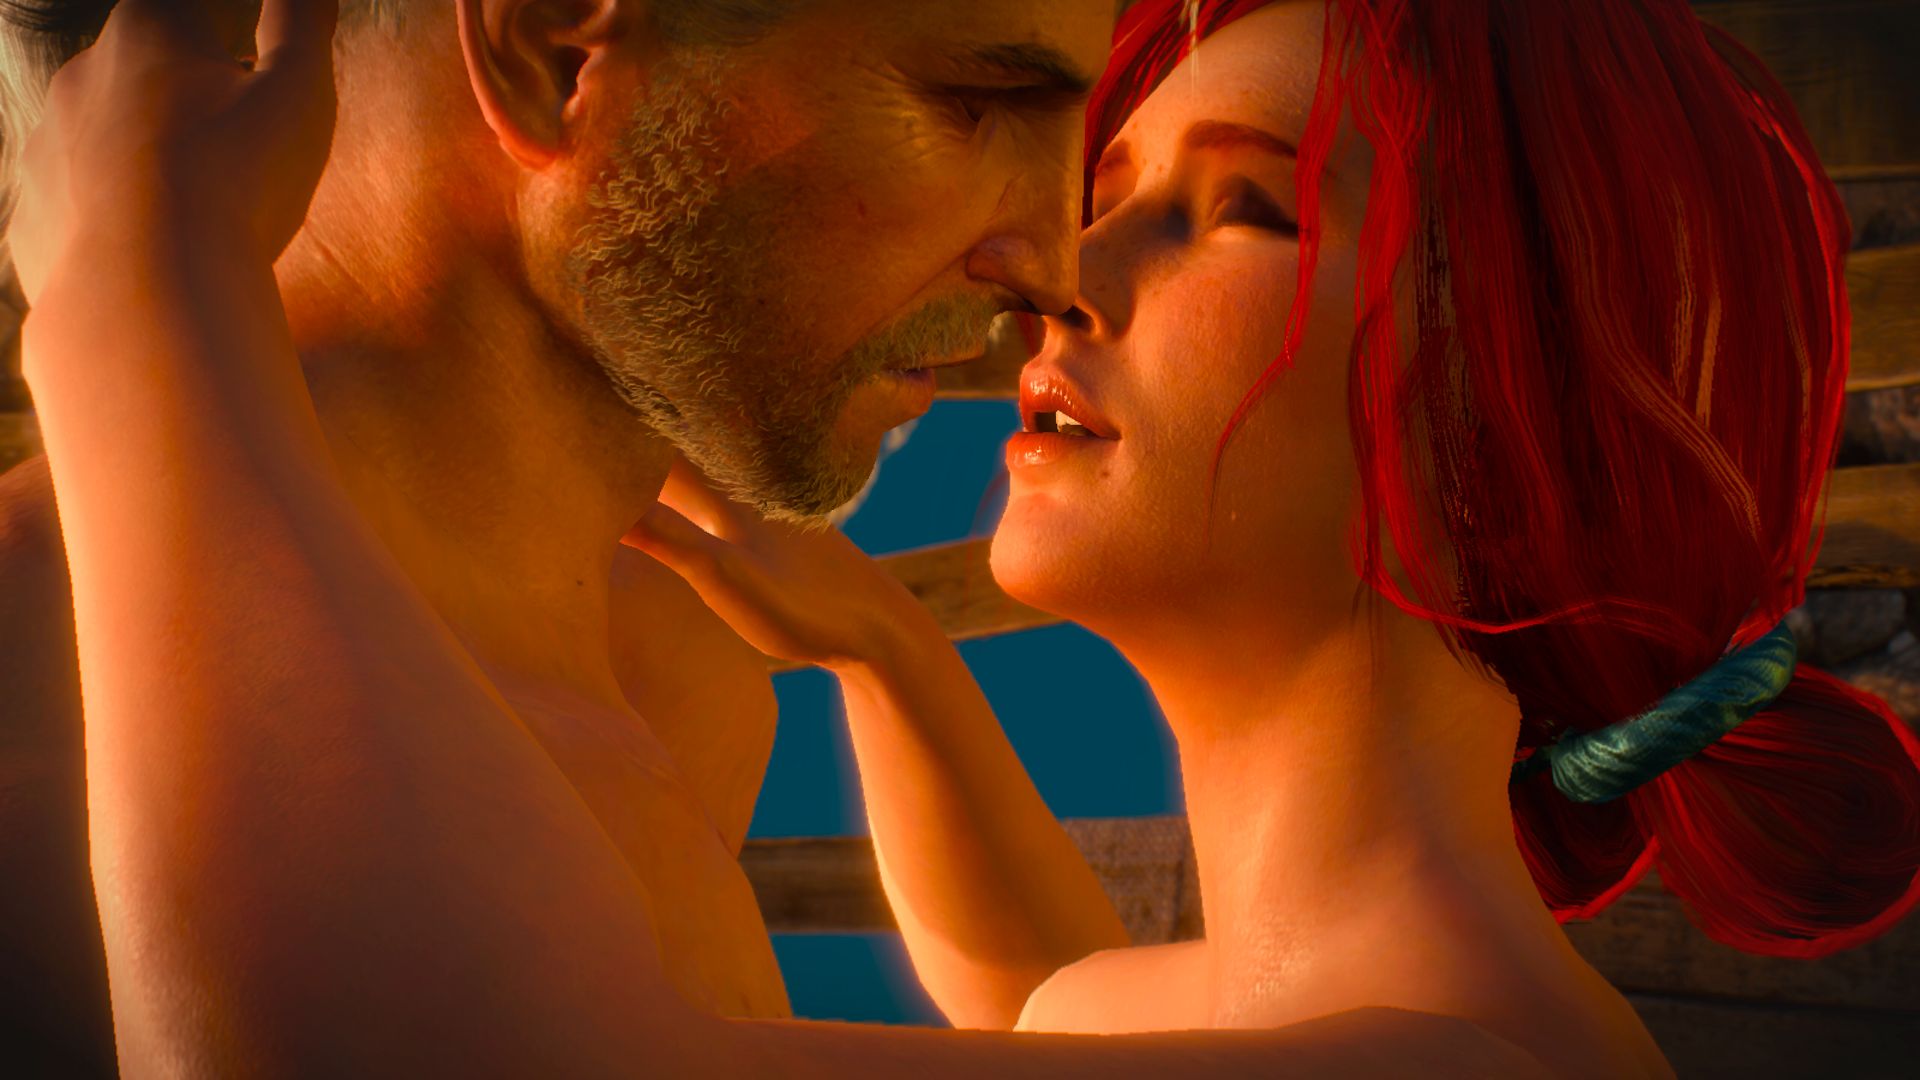 How to fix realitonship with triss after threesome